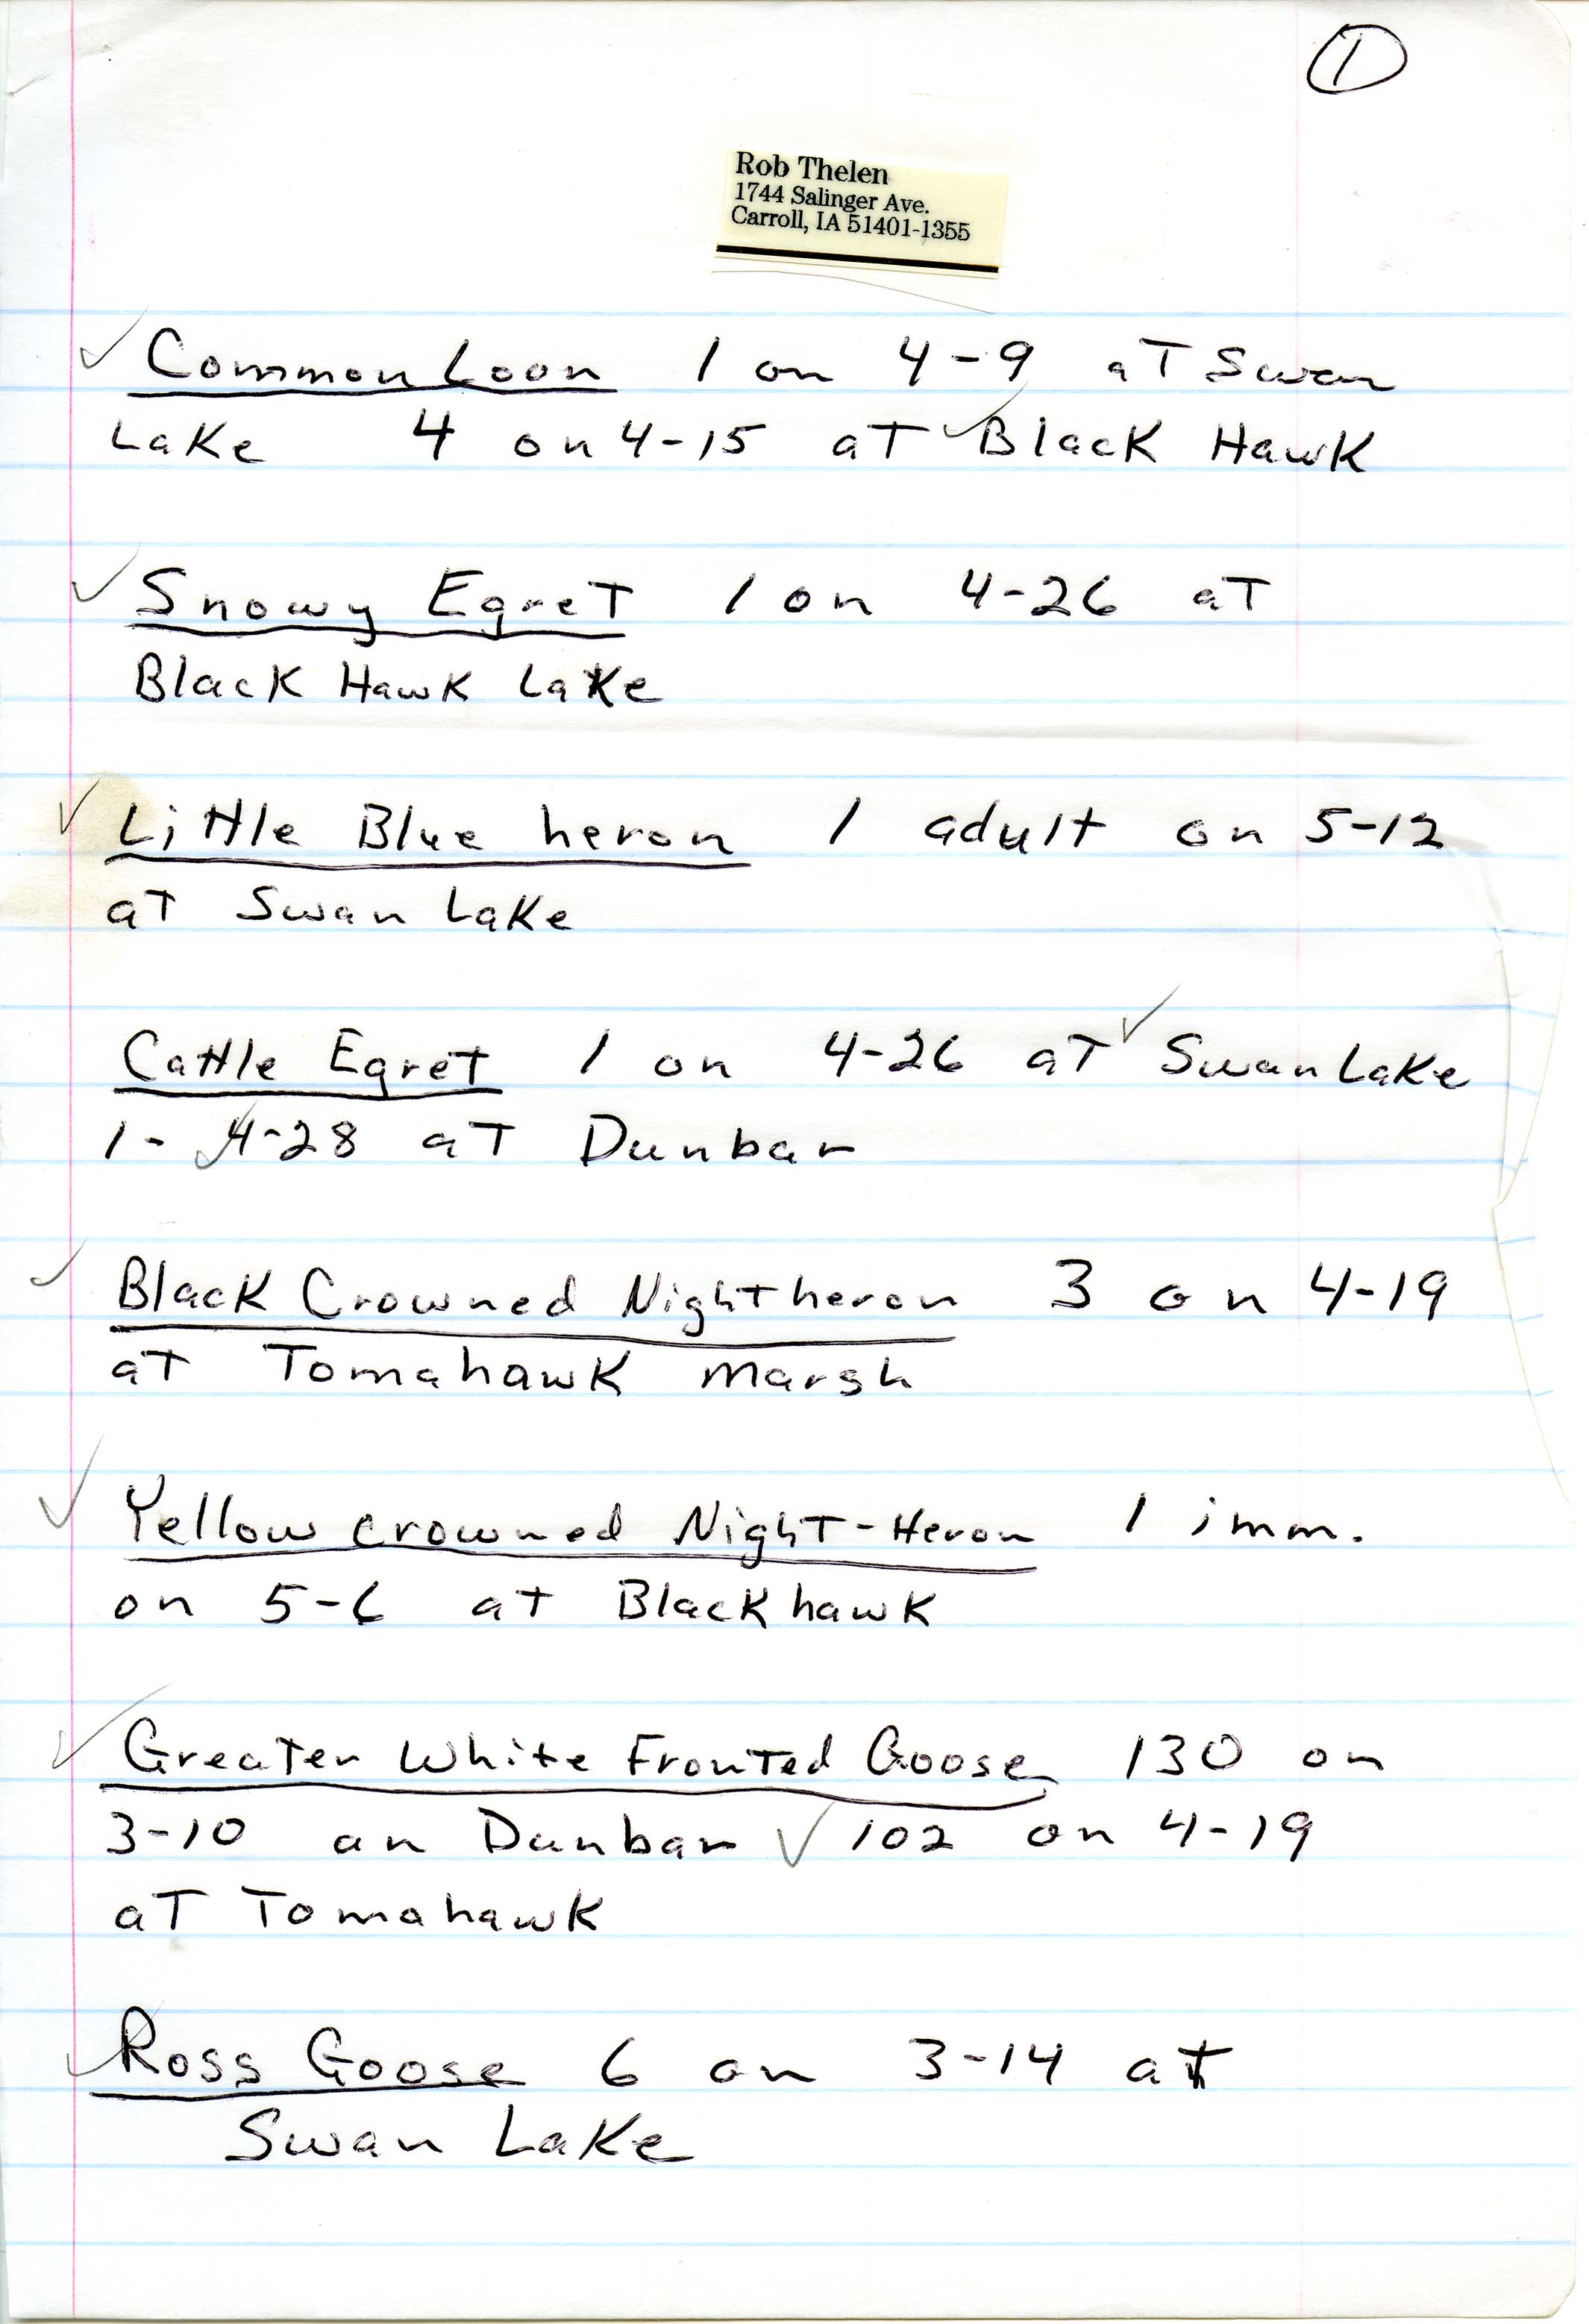 Field notes contributed by Rob Thelen, spring 1996